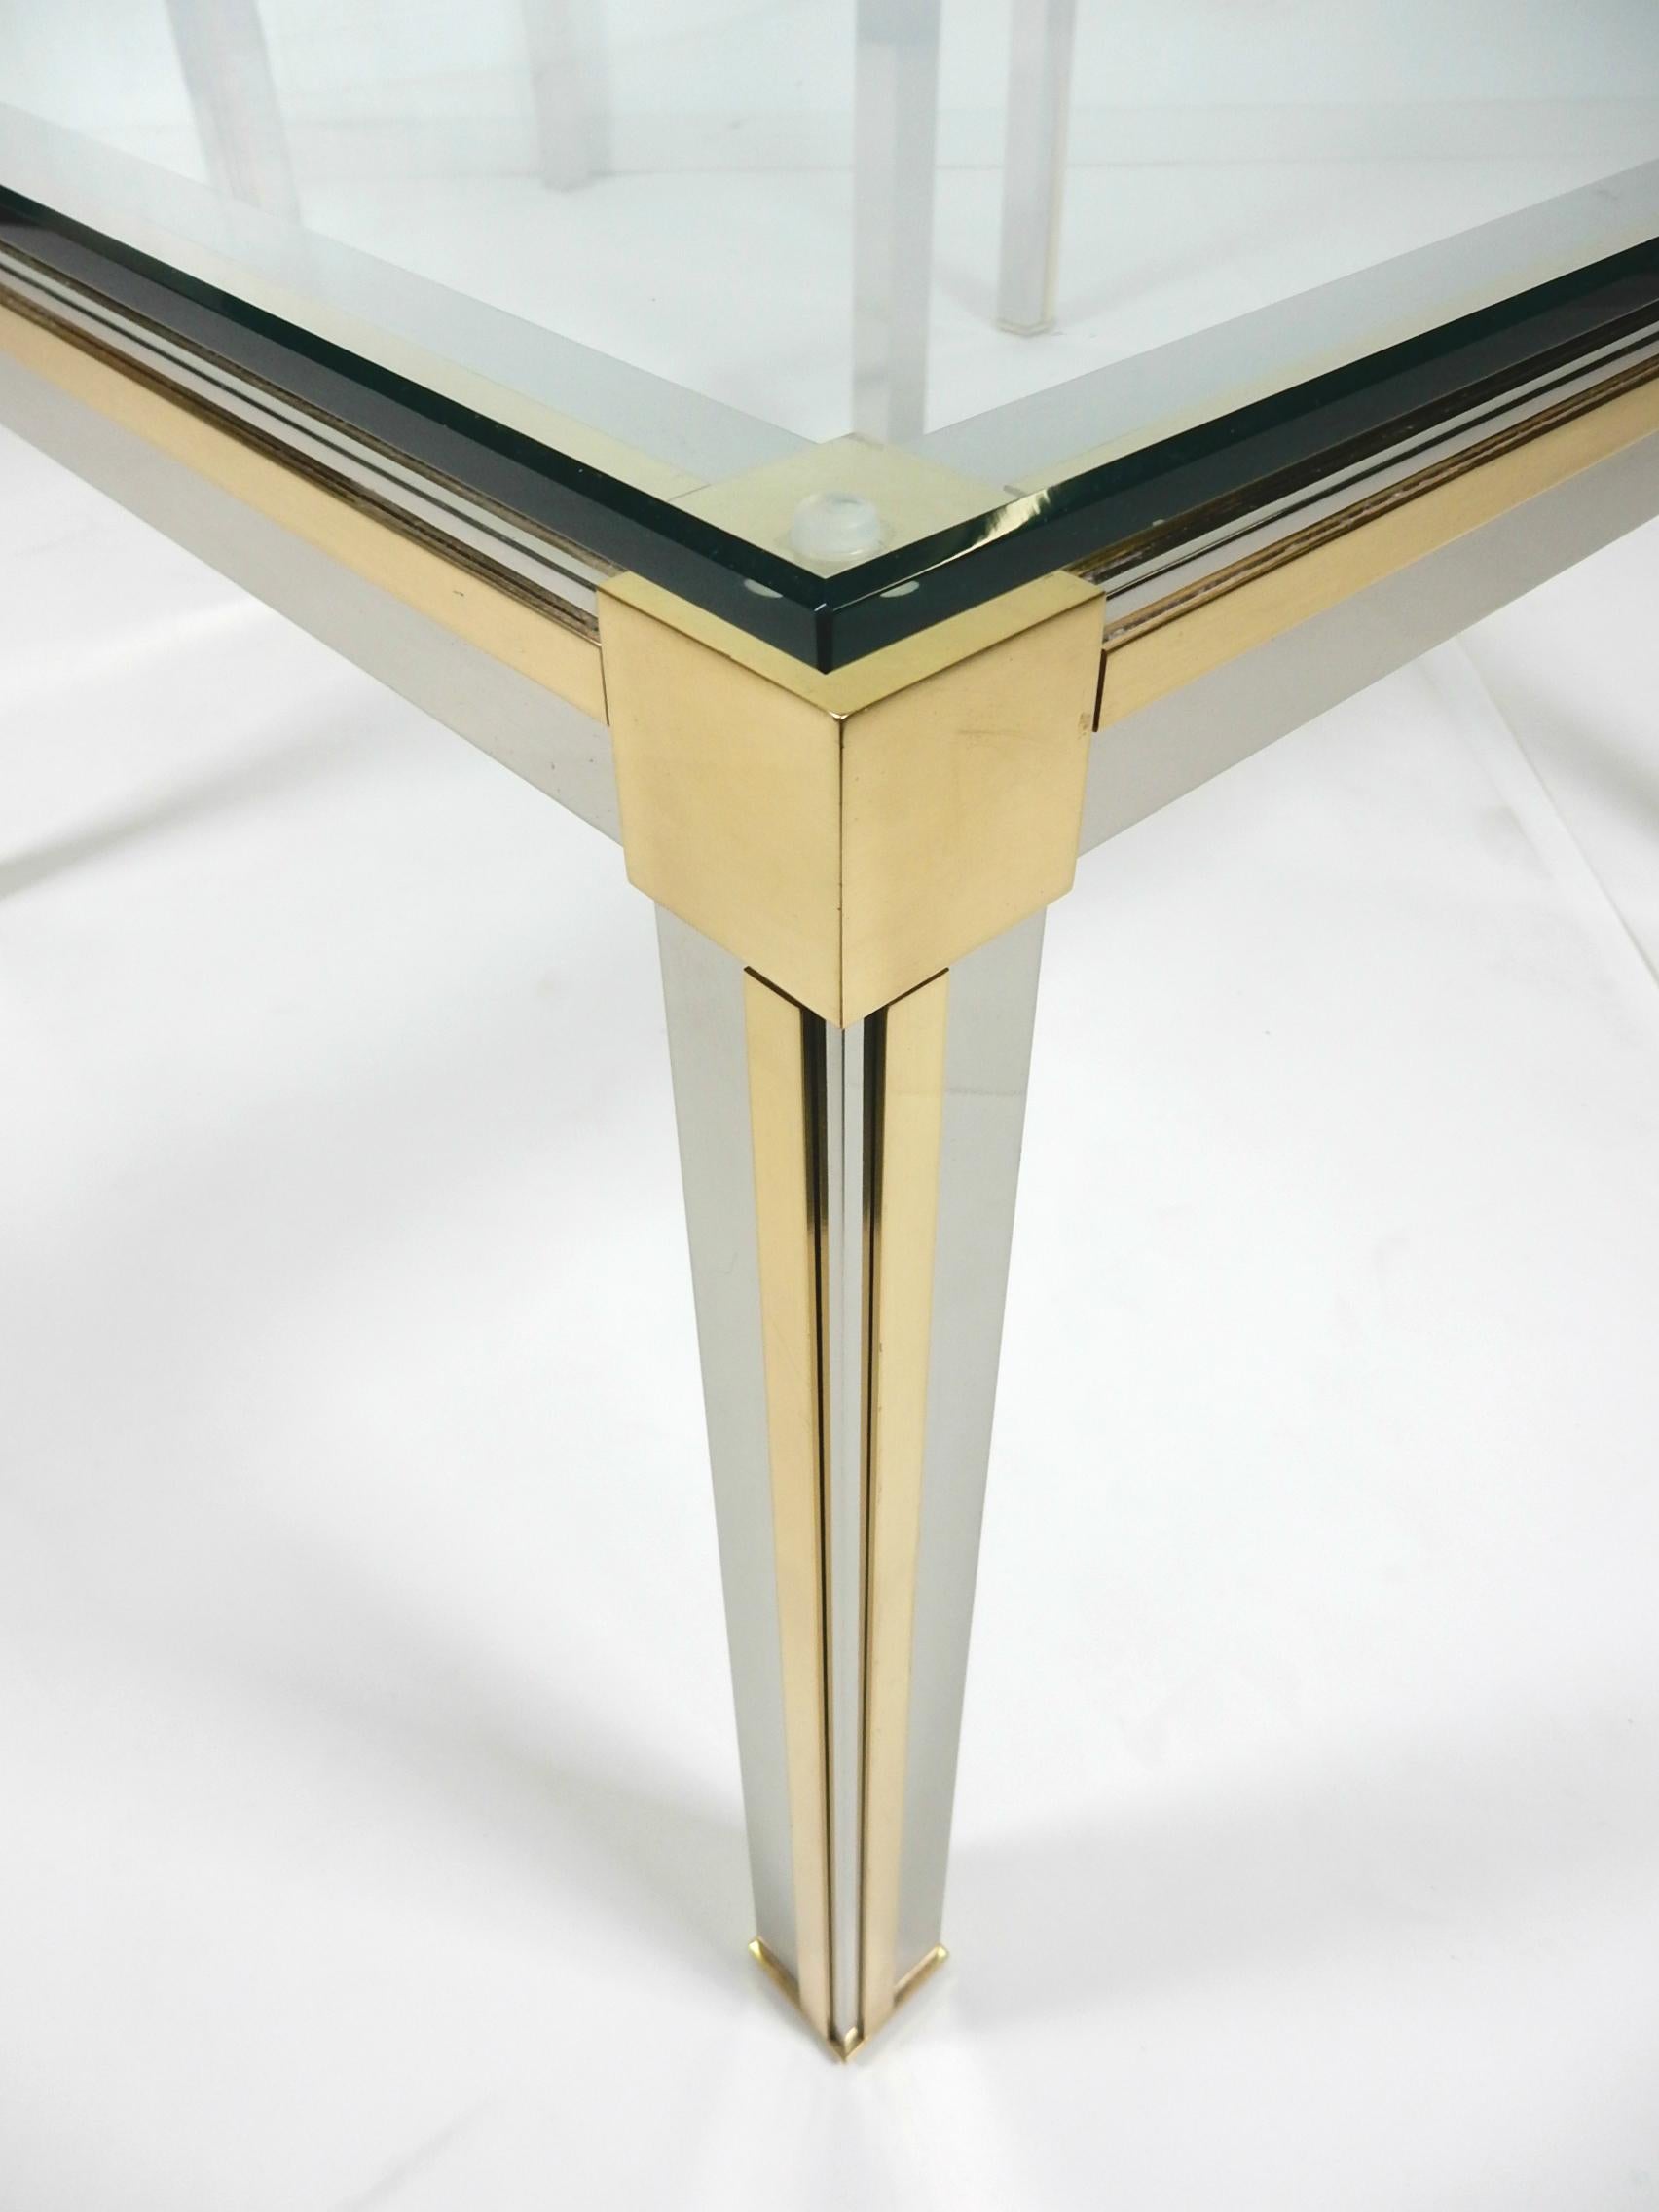 Exceptional pair of large chrome and brass side tables attributed to designer Romeo Rega.
Heavy, well crafted quality tables with thick glass tops.
Clean, sharp edge design. Could be used together as a large cocktail table.